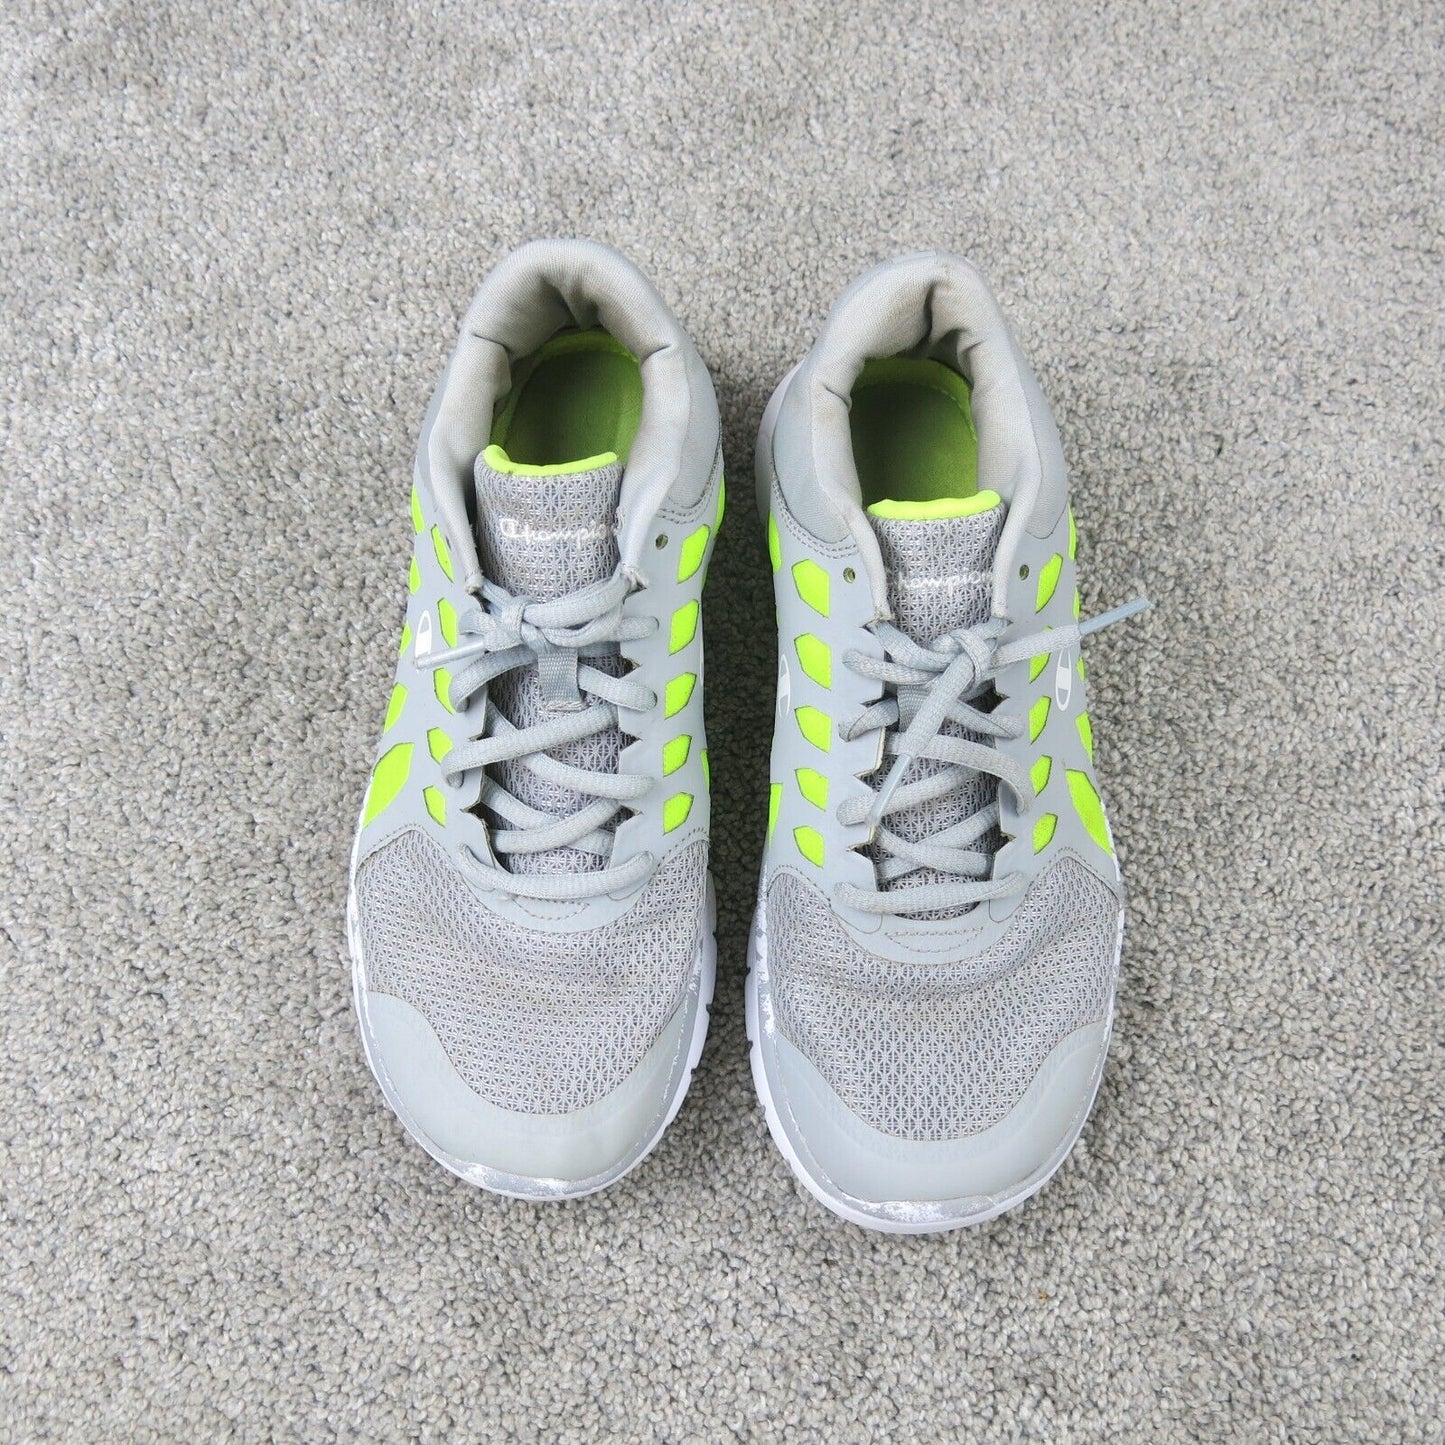 Champion Womens Running Shoes Green/Gray Athletic Training Low Top Size US 7